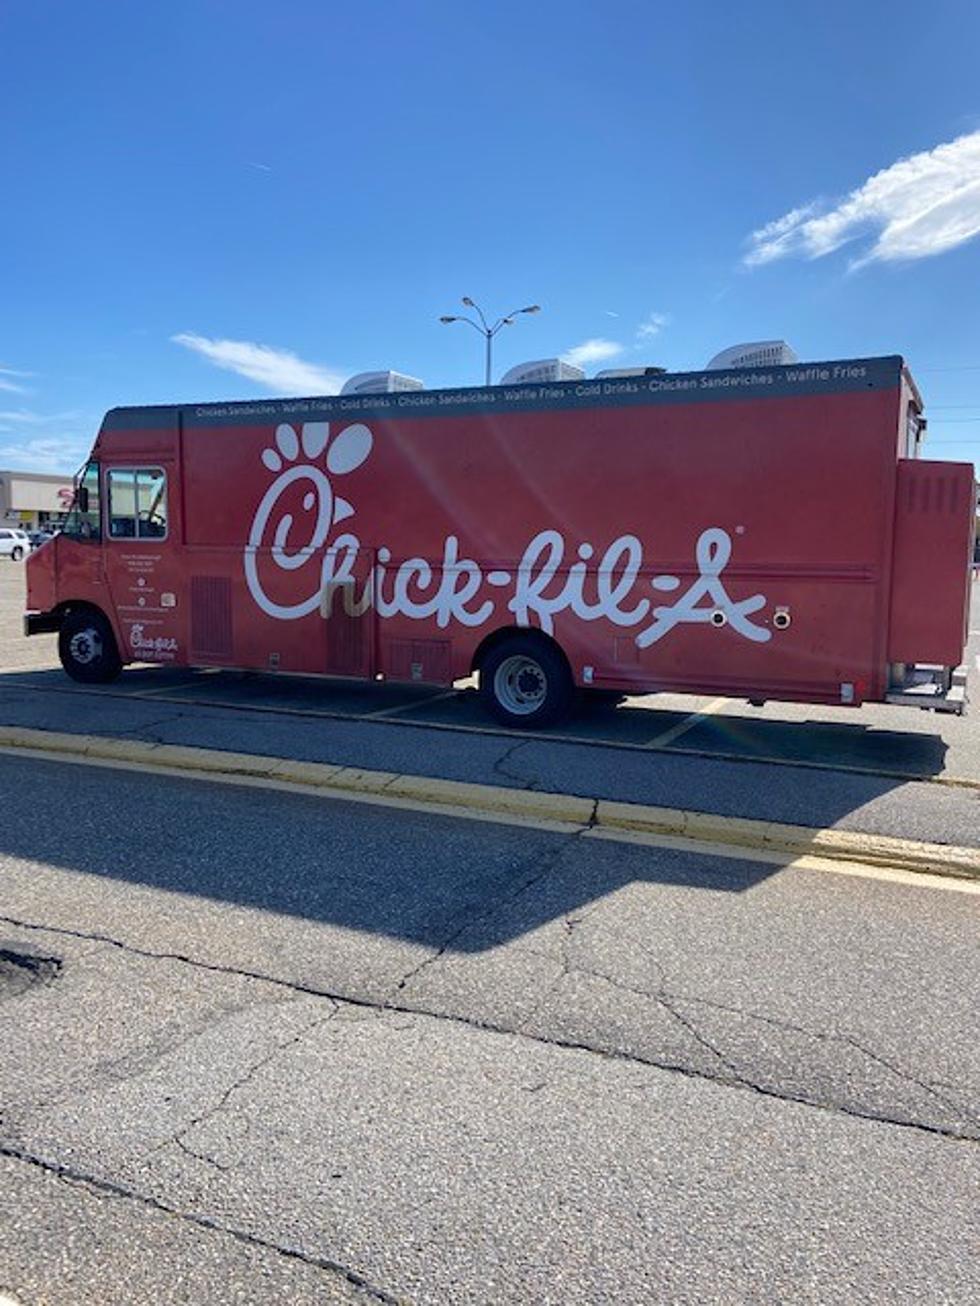 Where Can I Get Some Amazing Food From Chick-fil-A Here On the Seacoast?